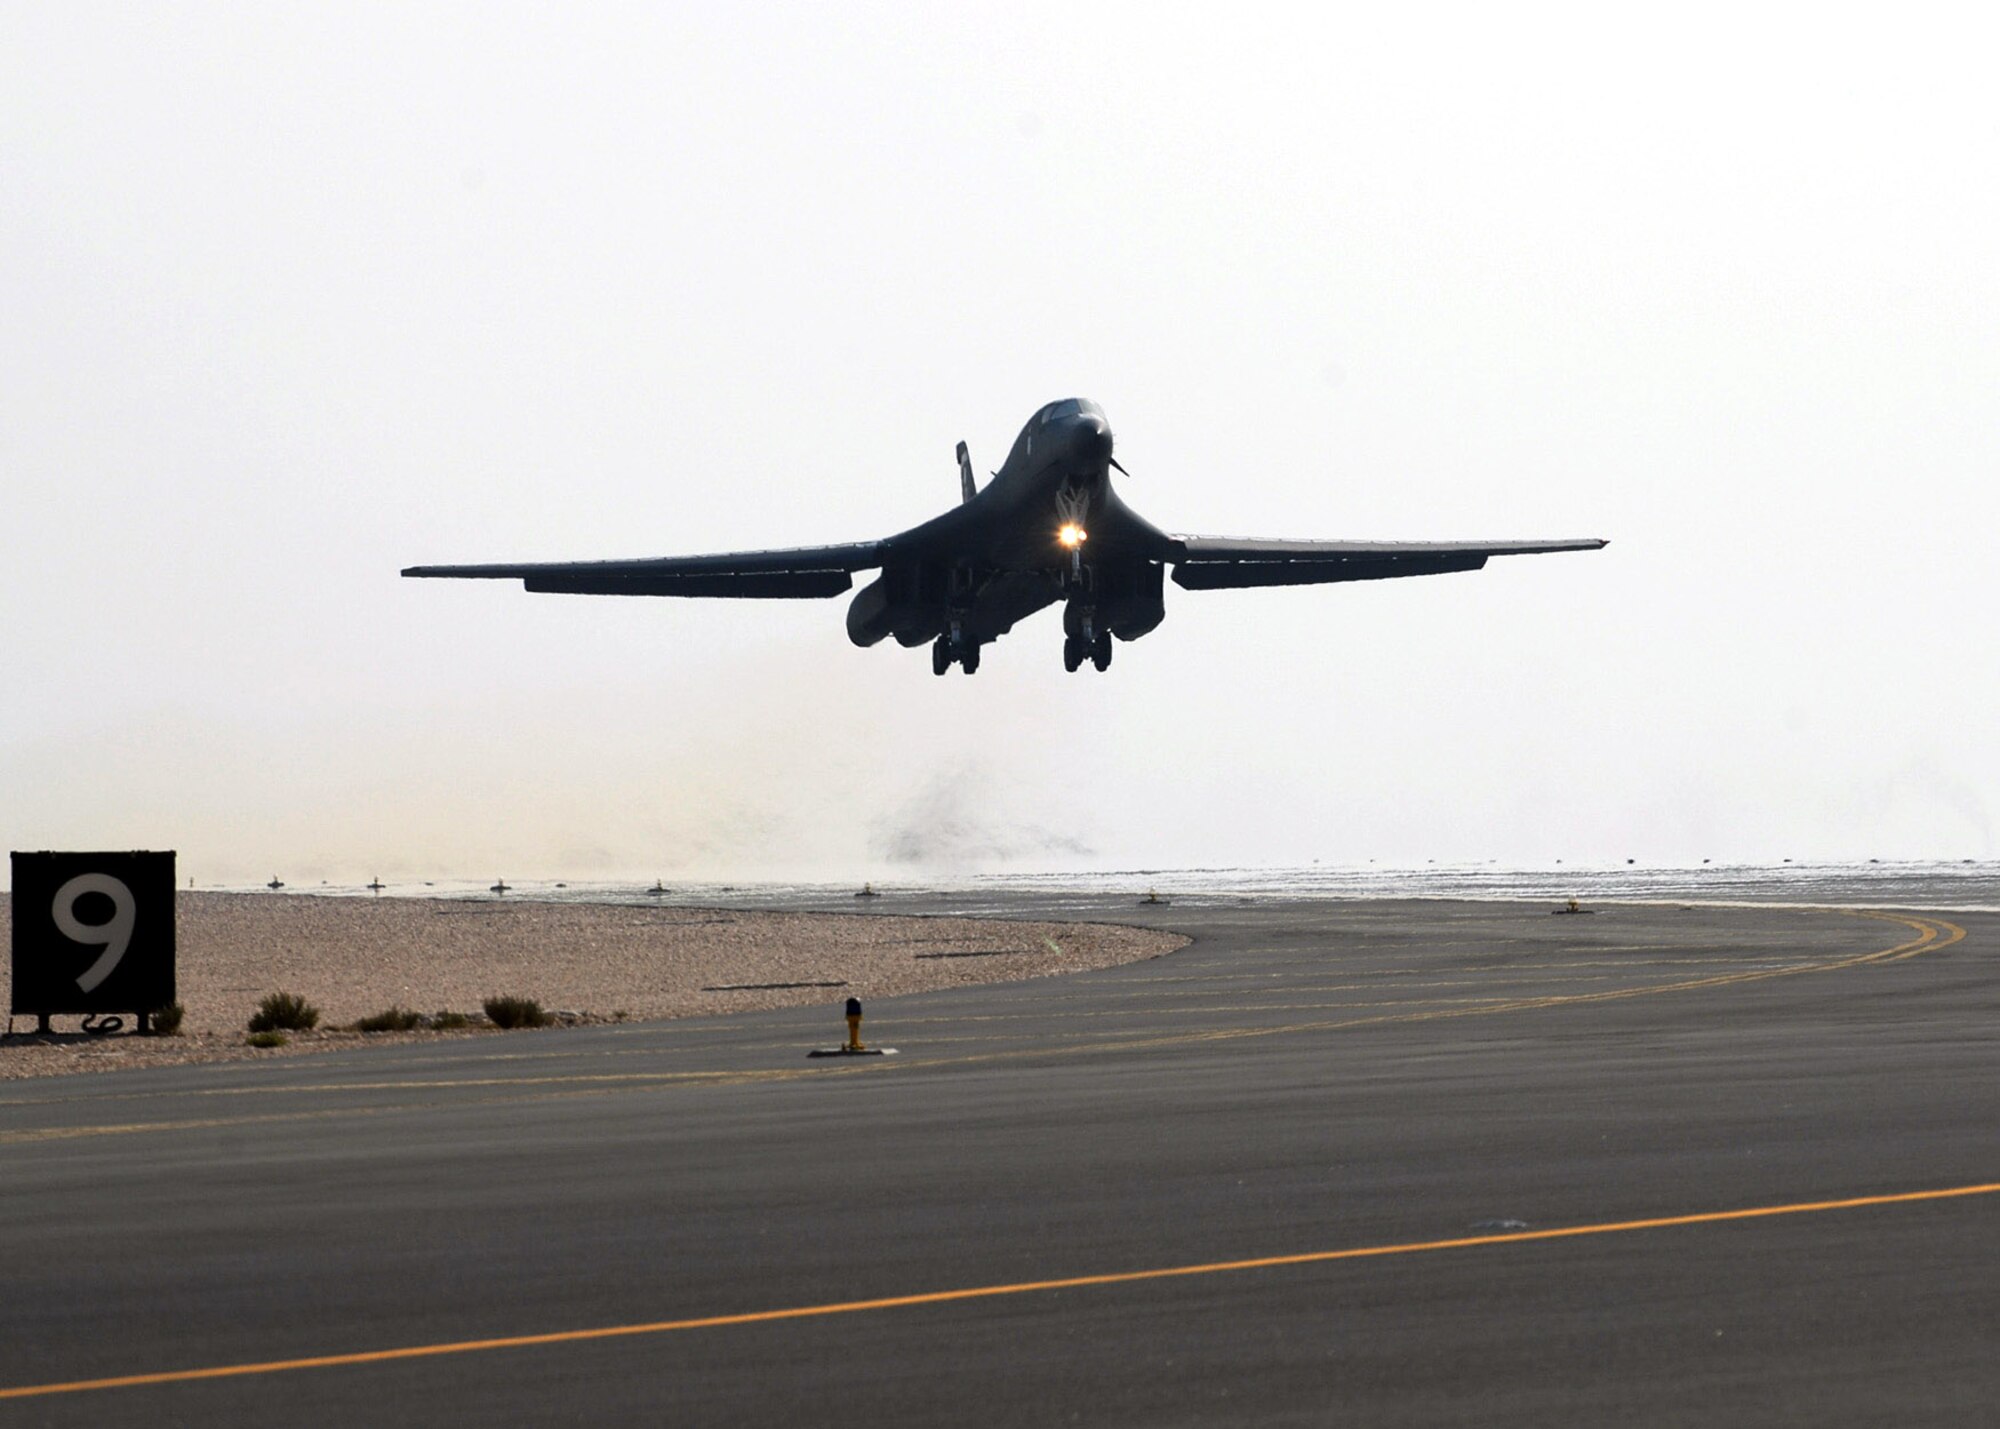 A mission-bound B-1B Lancer lifts off from the runway of an air base in Southwest Asia Dec.29. The B-1B is a multi-role, long-range bomber capable of flying intercontinental missions without refueling.  It can perform a variety of missions, including that of carrying conventional weapons for theater operations. (U. S. Air Force photo/Staff Sgt. Douglas Olsen)